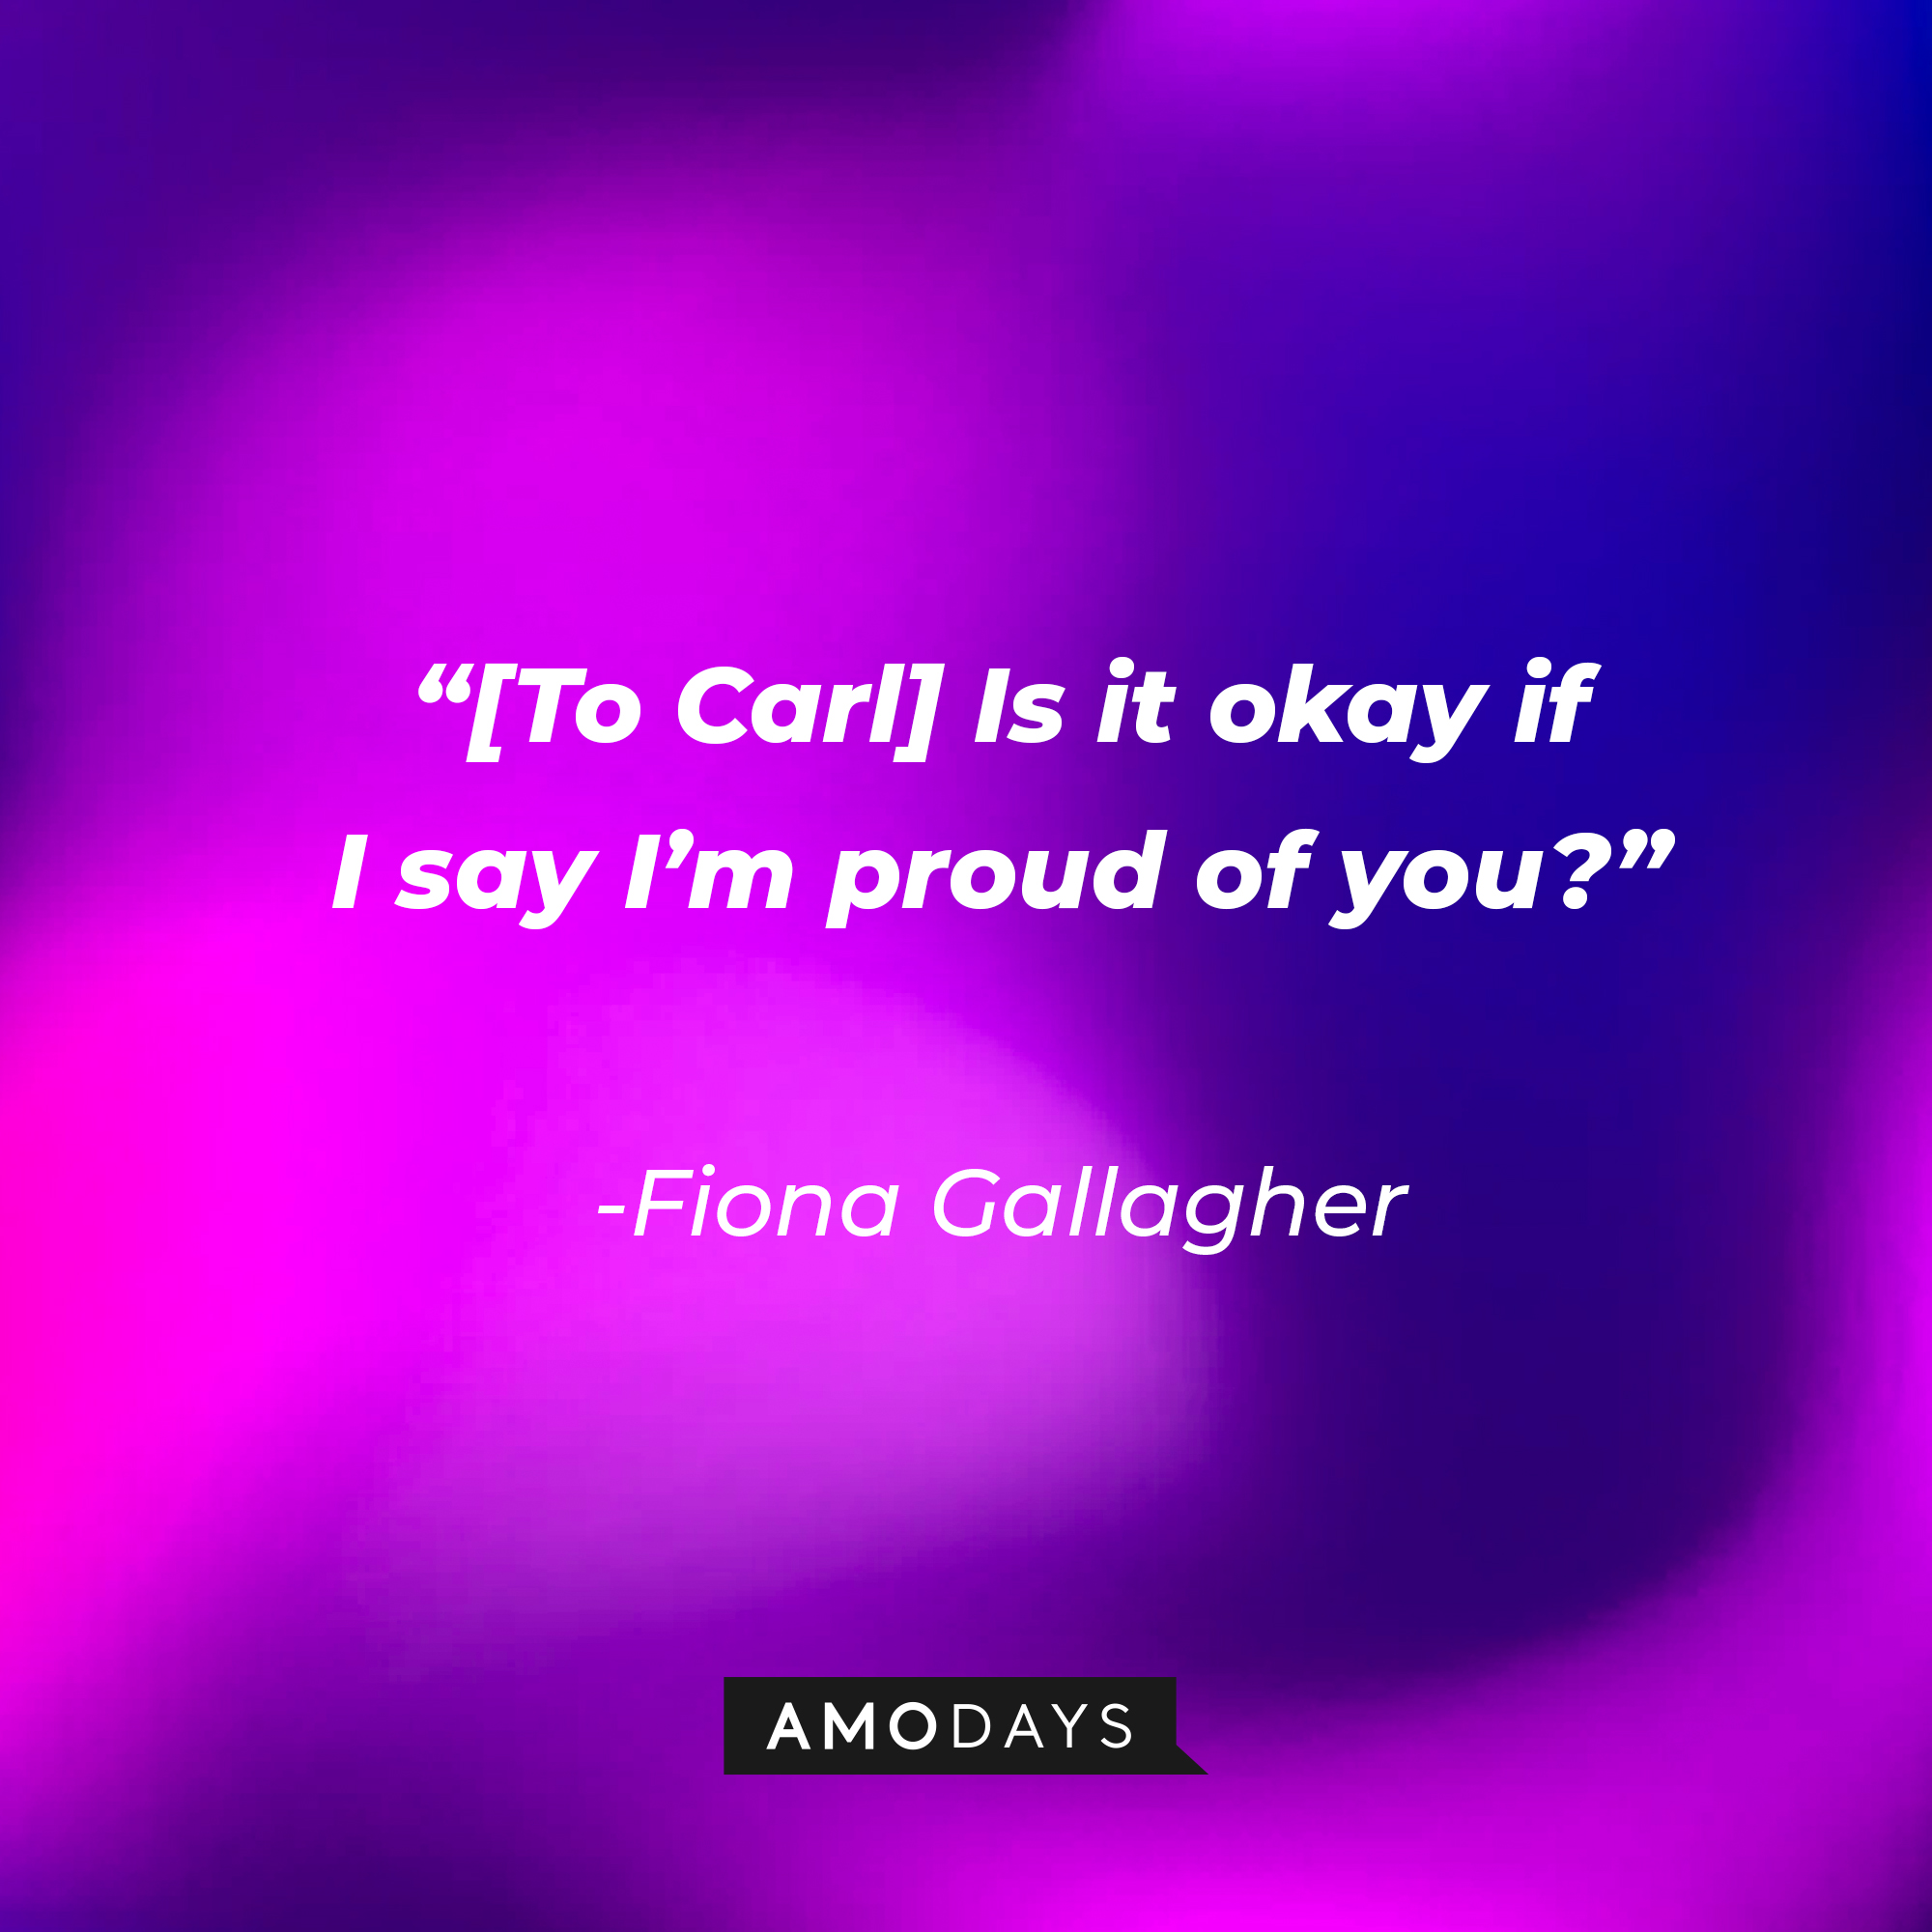 Fiona Gallagher’s quote: “[To Carl] Is it okay if I say I’m proud of you?” | Source: AmoDays